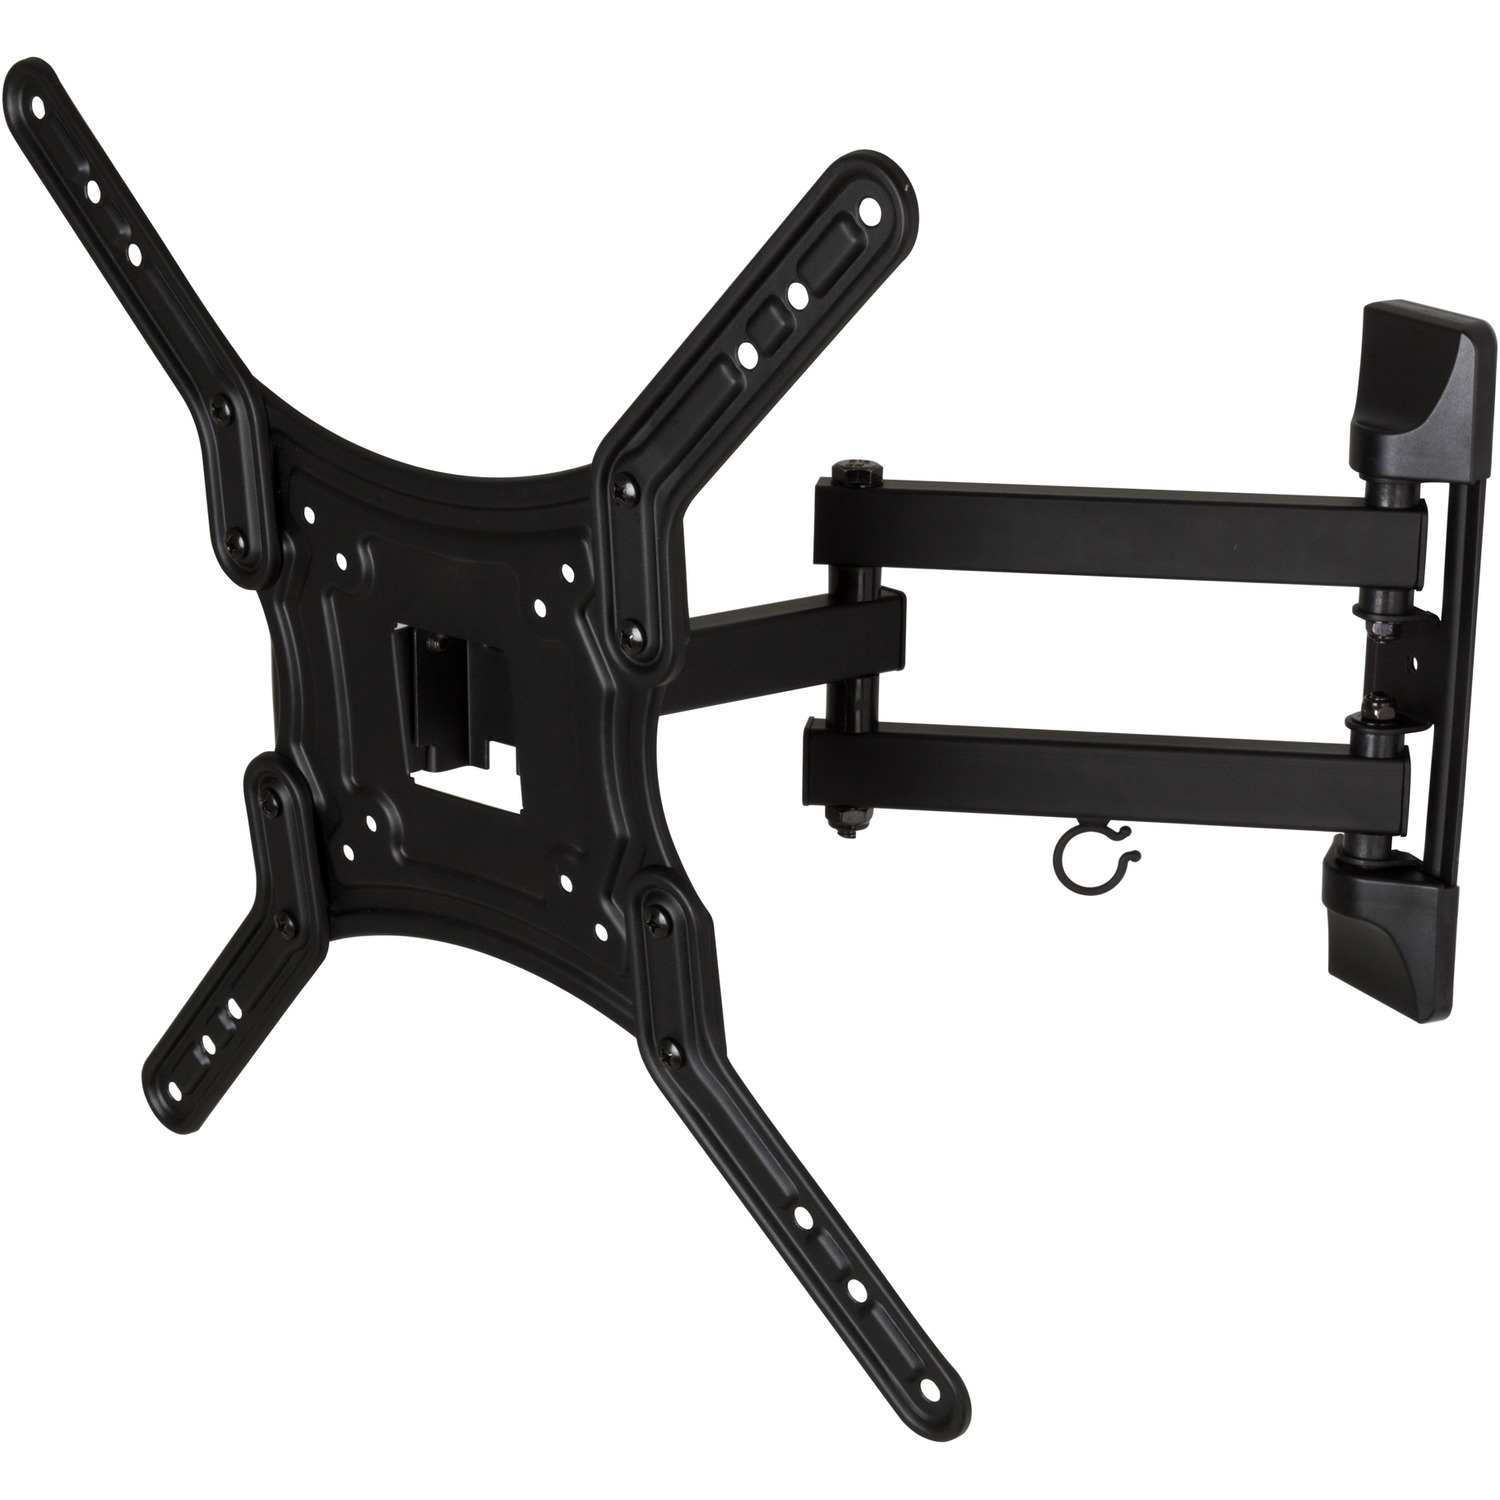 Jet Black 26 to 55 inch Multi Position TV Wall Mount Image 1